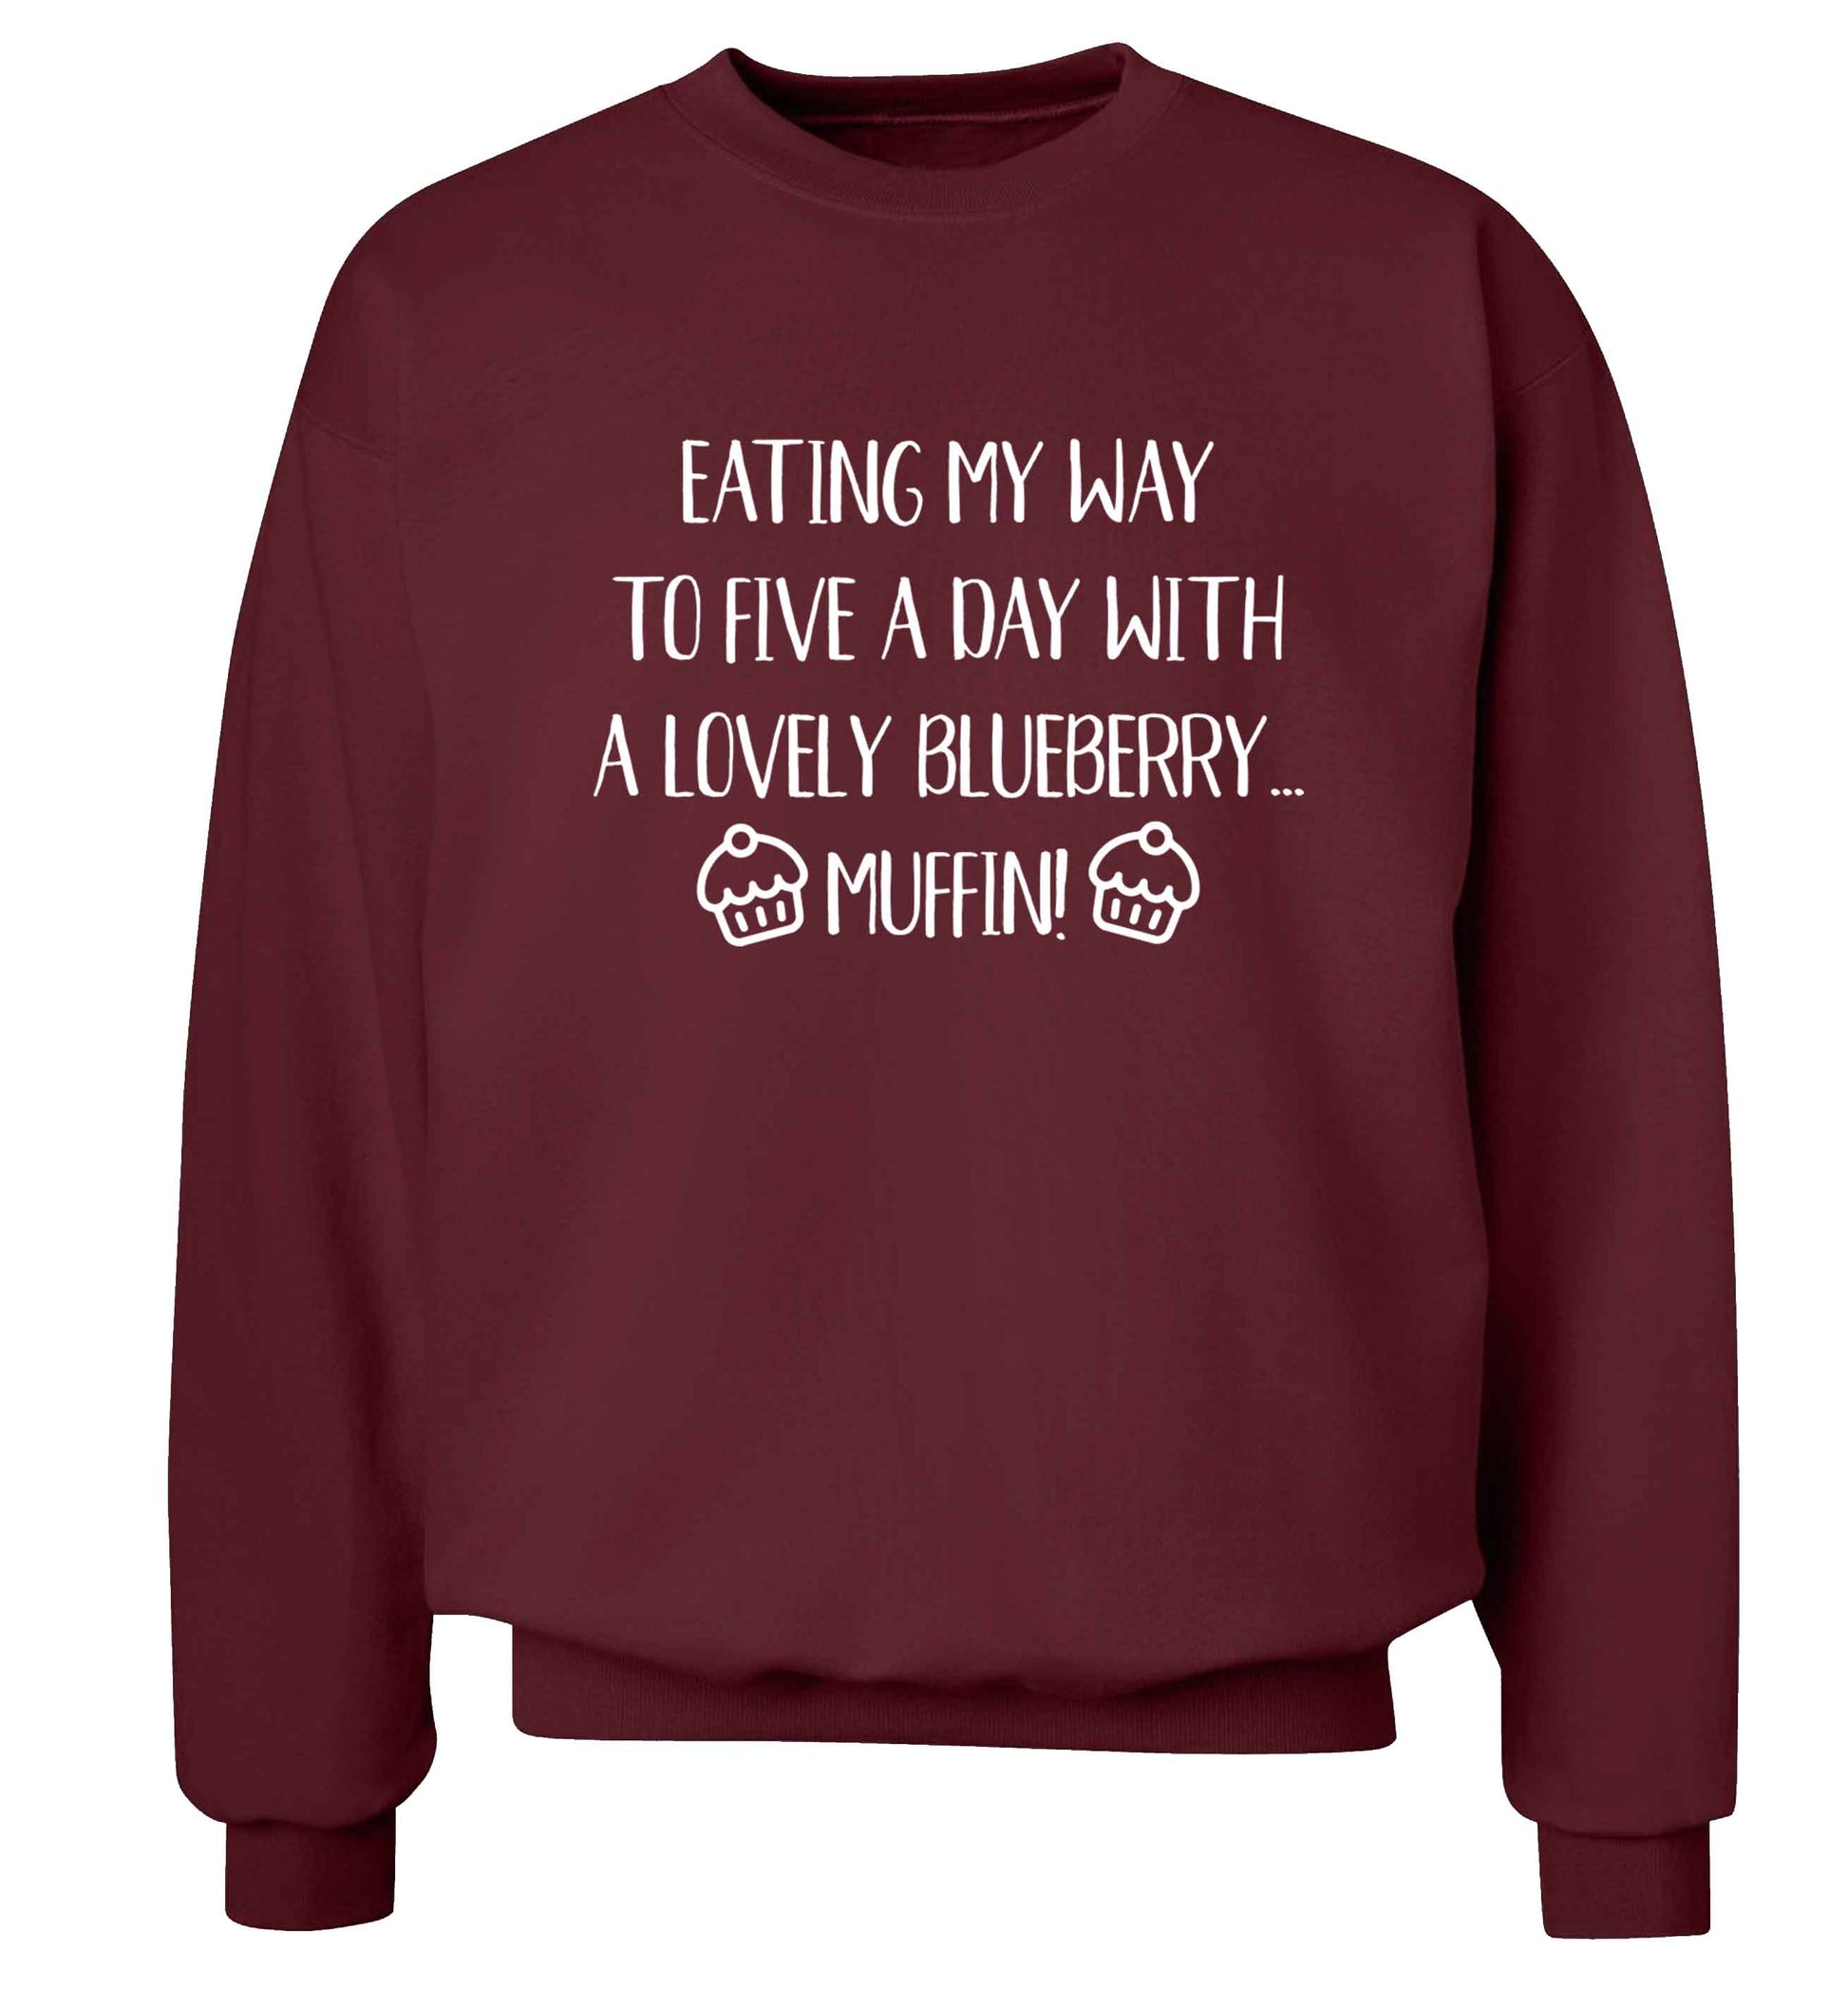 Eating my way to five a day with a lovely blueberry muffin Adult's unisex maroon Sweater 2XL